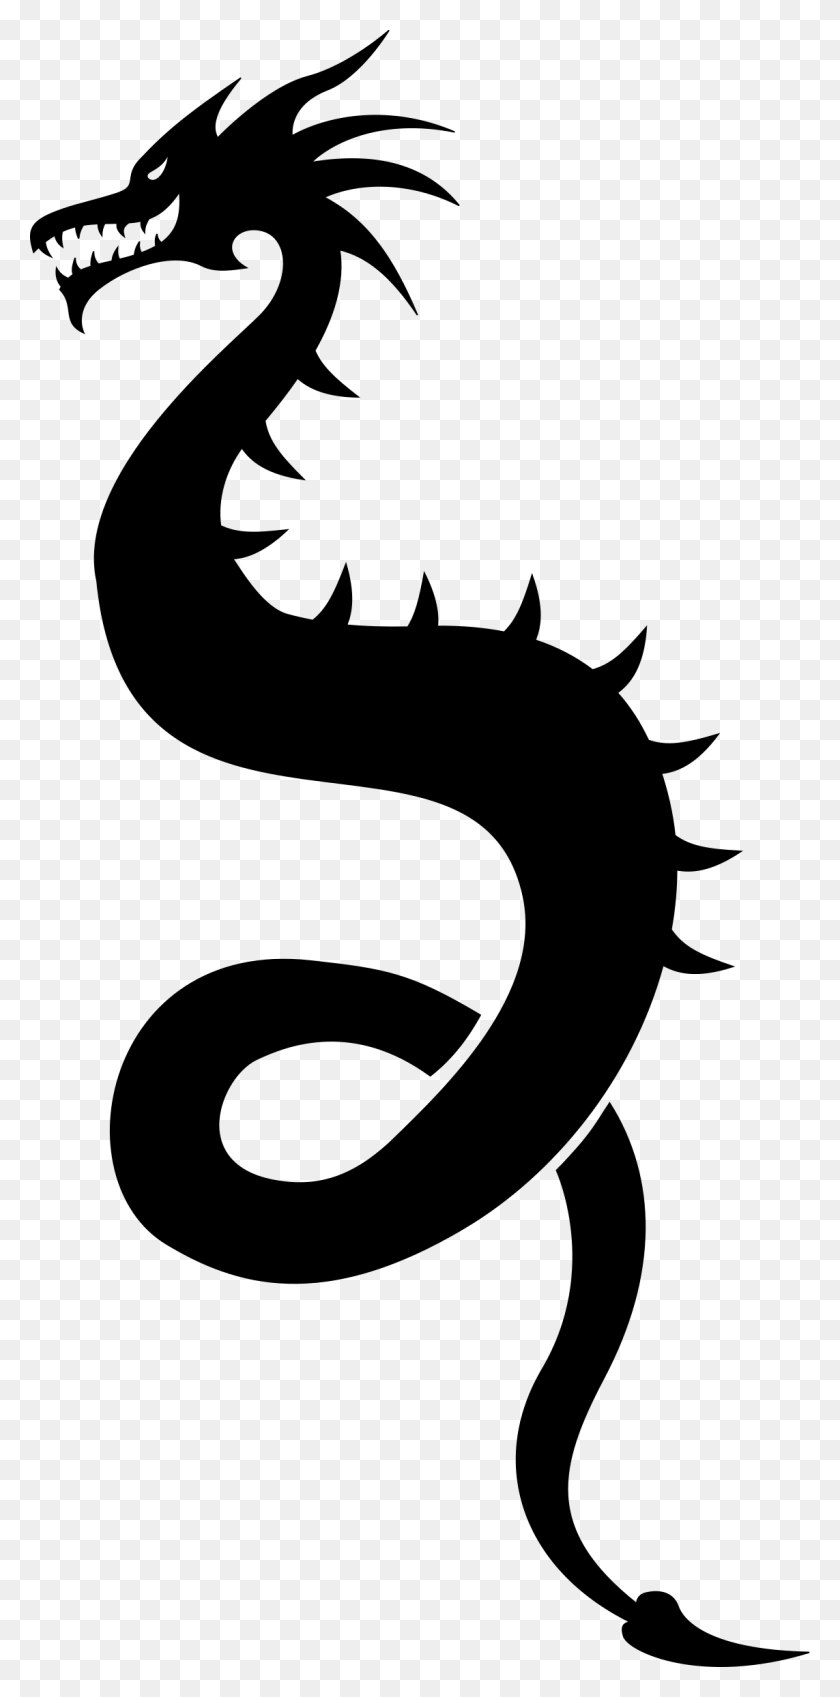 1143x2400 Dragon Silhouette Vector Clipart Image - Chinese Dragon PNG